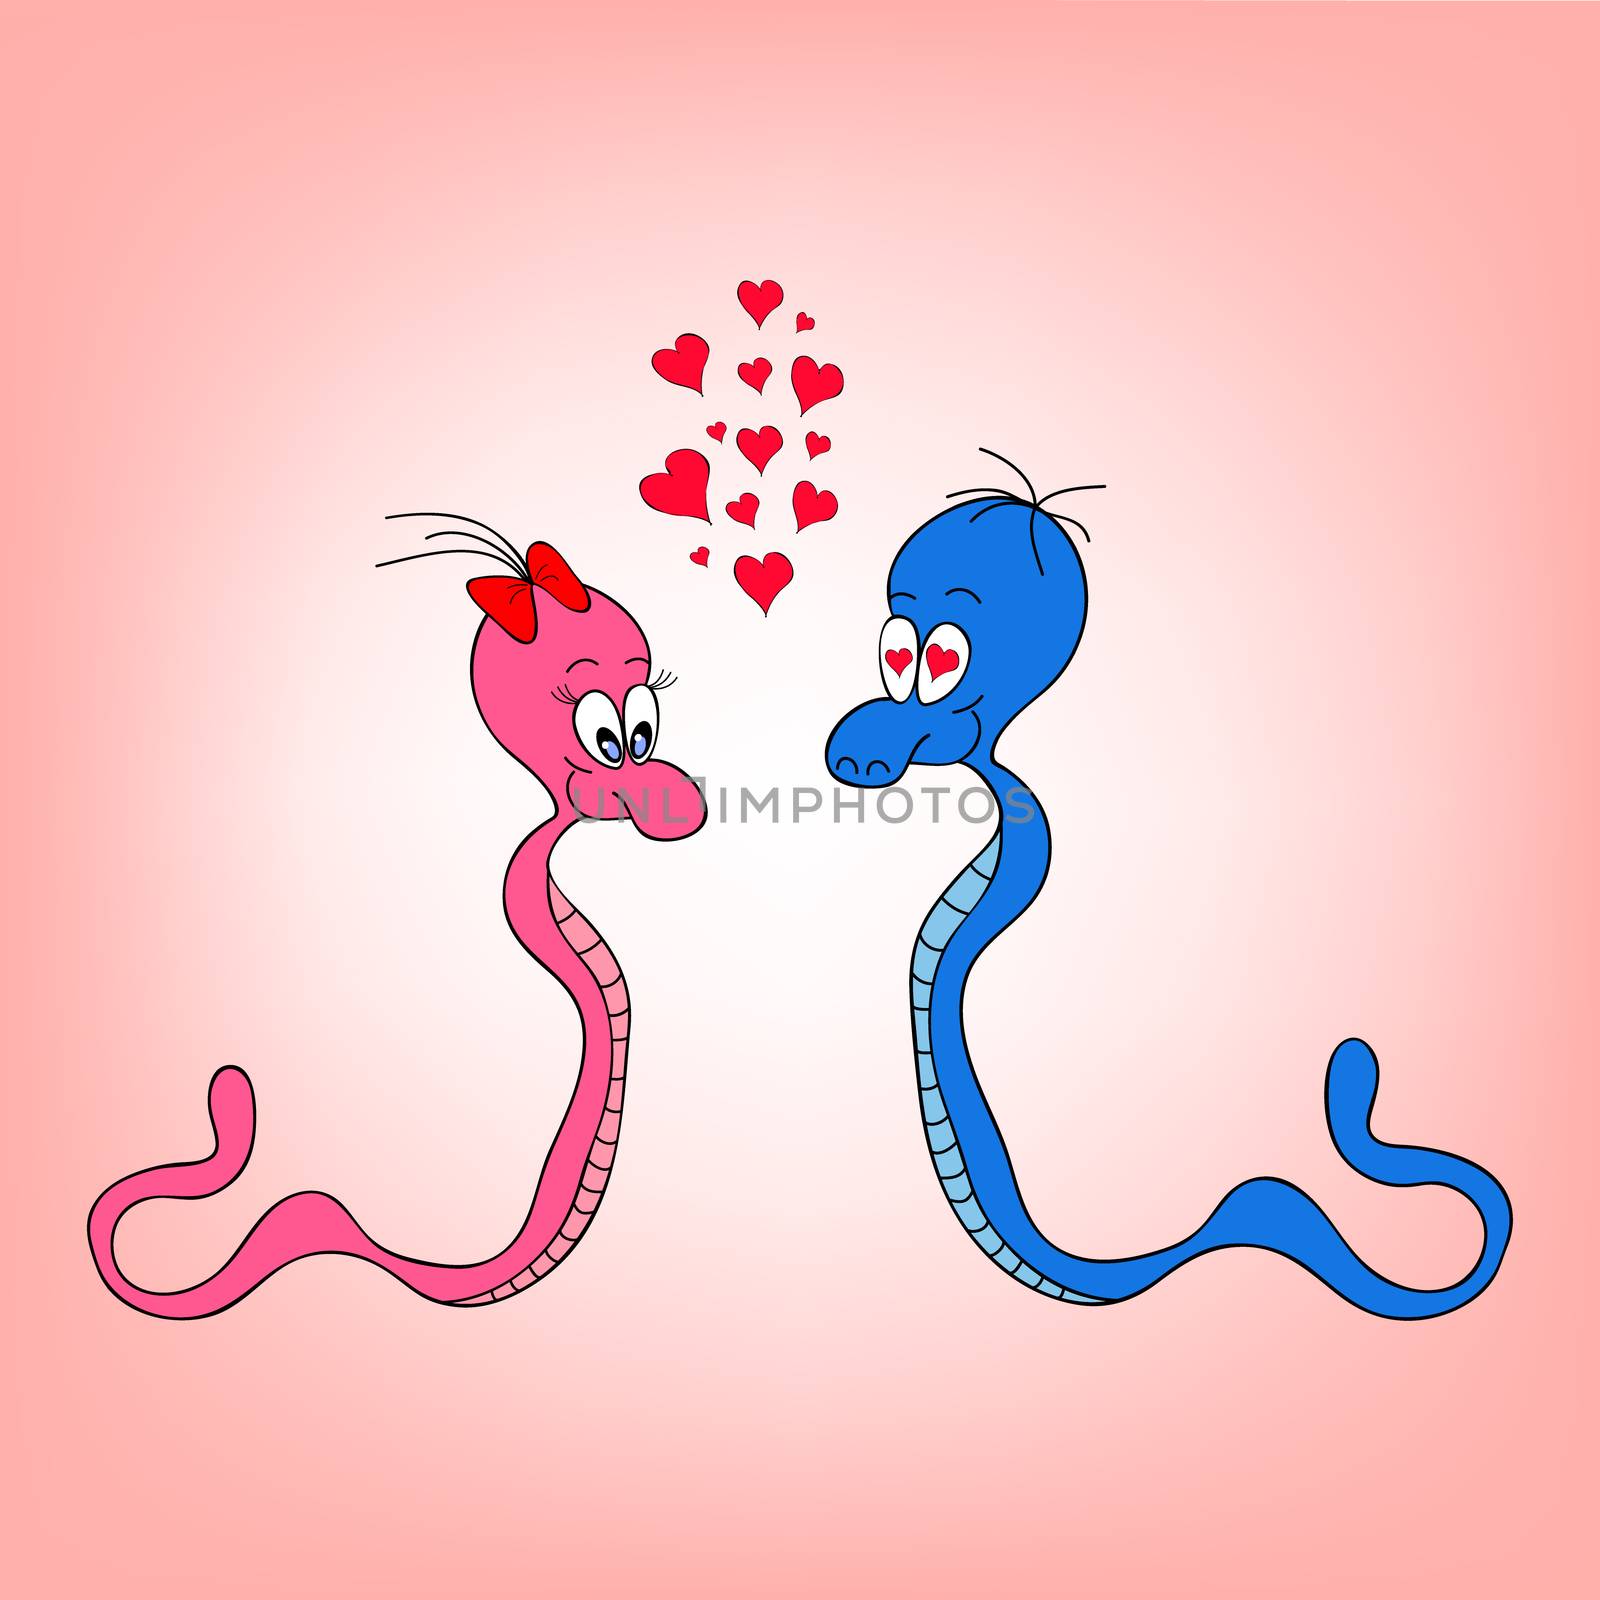 Worms in love by rinika